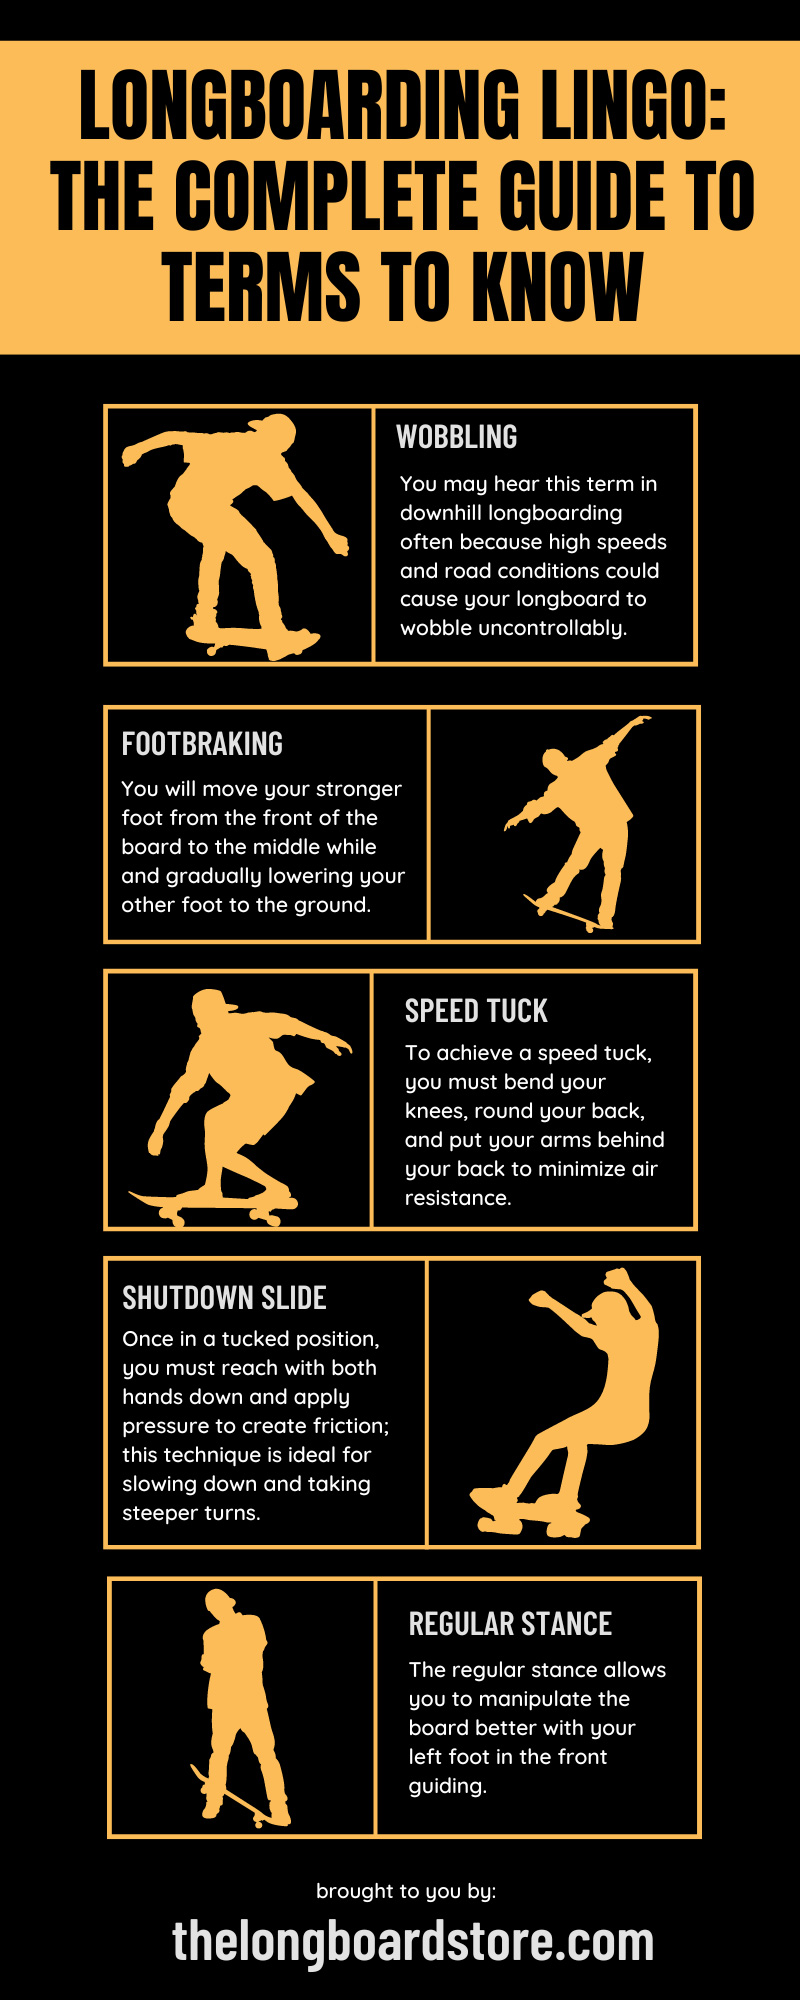 Longboarding Lingo: The Complete Guide to Terms To Know